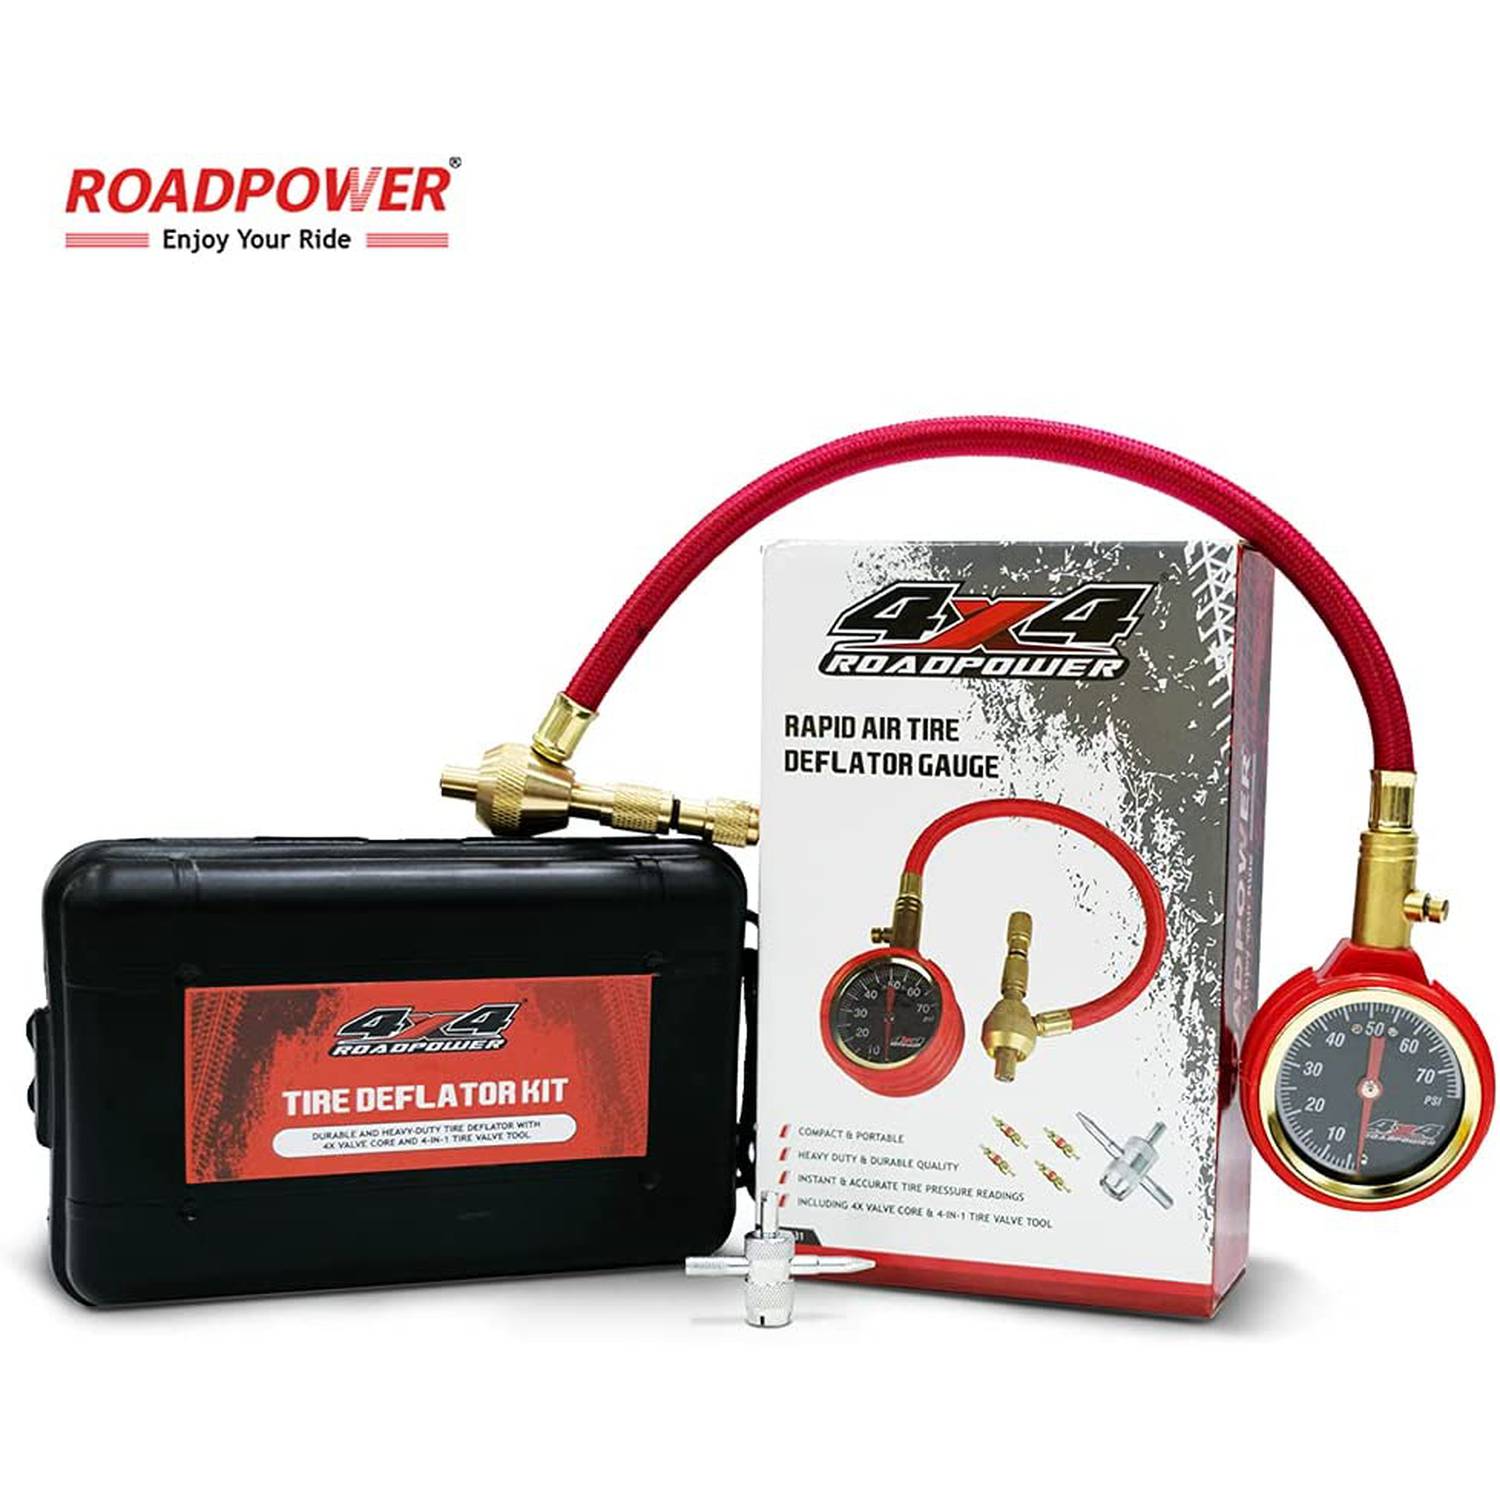 Rough Country Dual Tyre Inflator/Deflator Digital - RCDTI, RoughCountry, Brands, Autopro Category